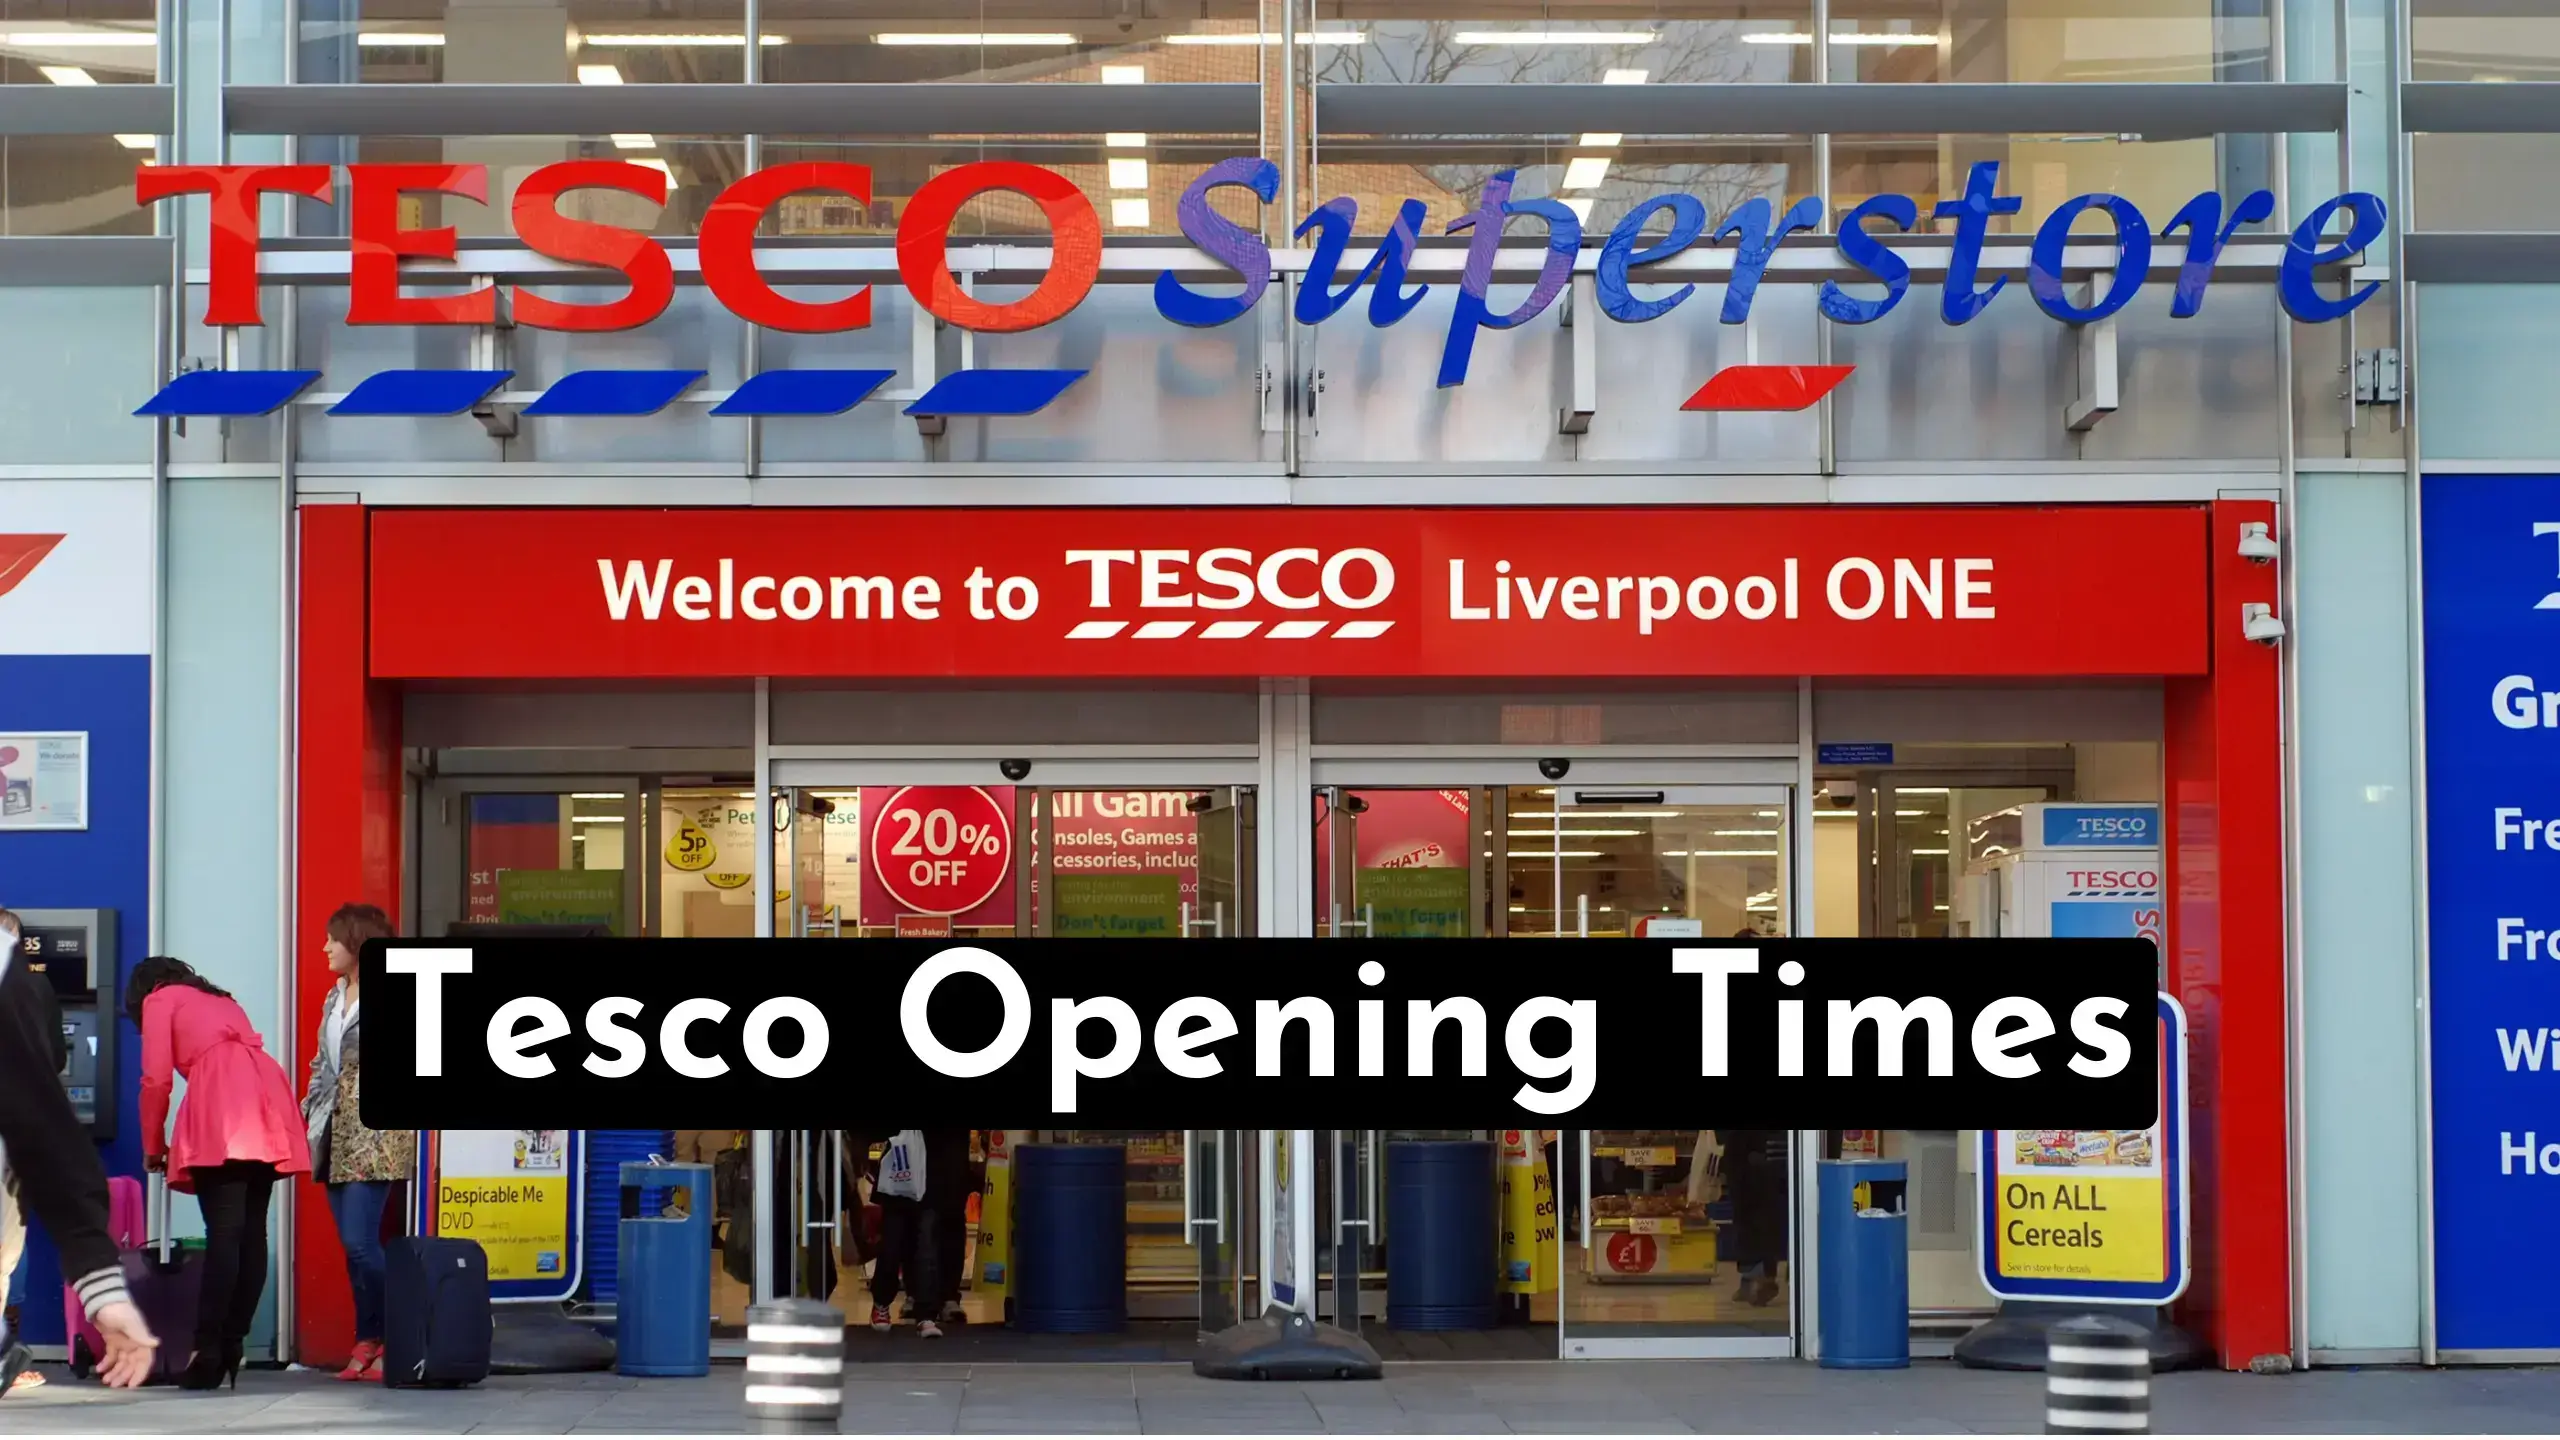 Tesco Opening Times: Discover the Best Time to Shop at Tesco